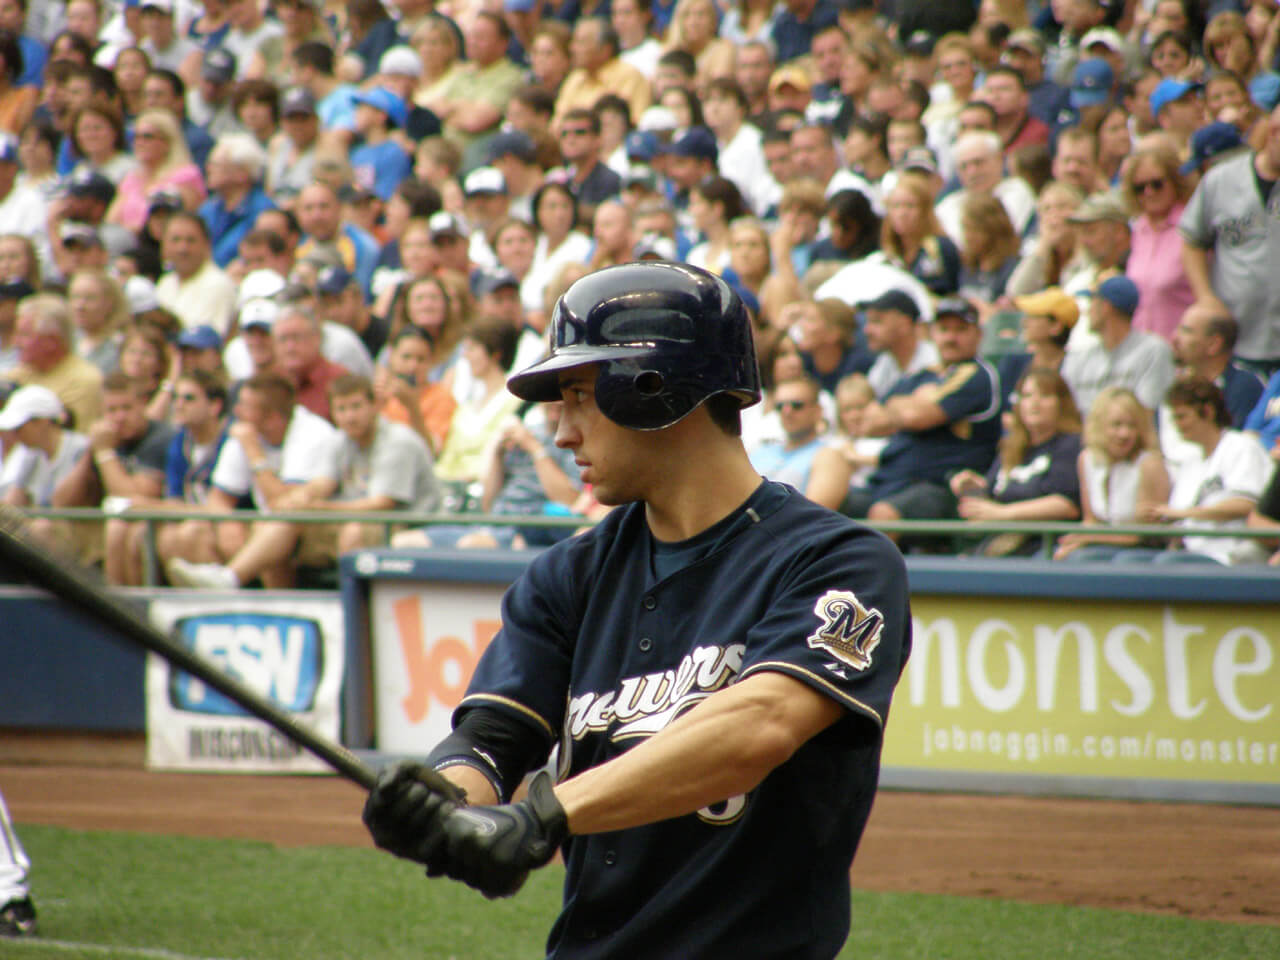 Ryan Braun at bat for the Brewers